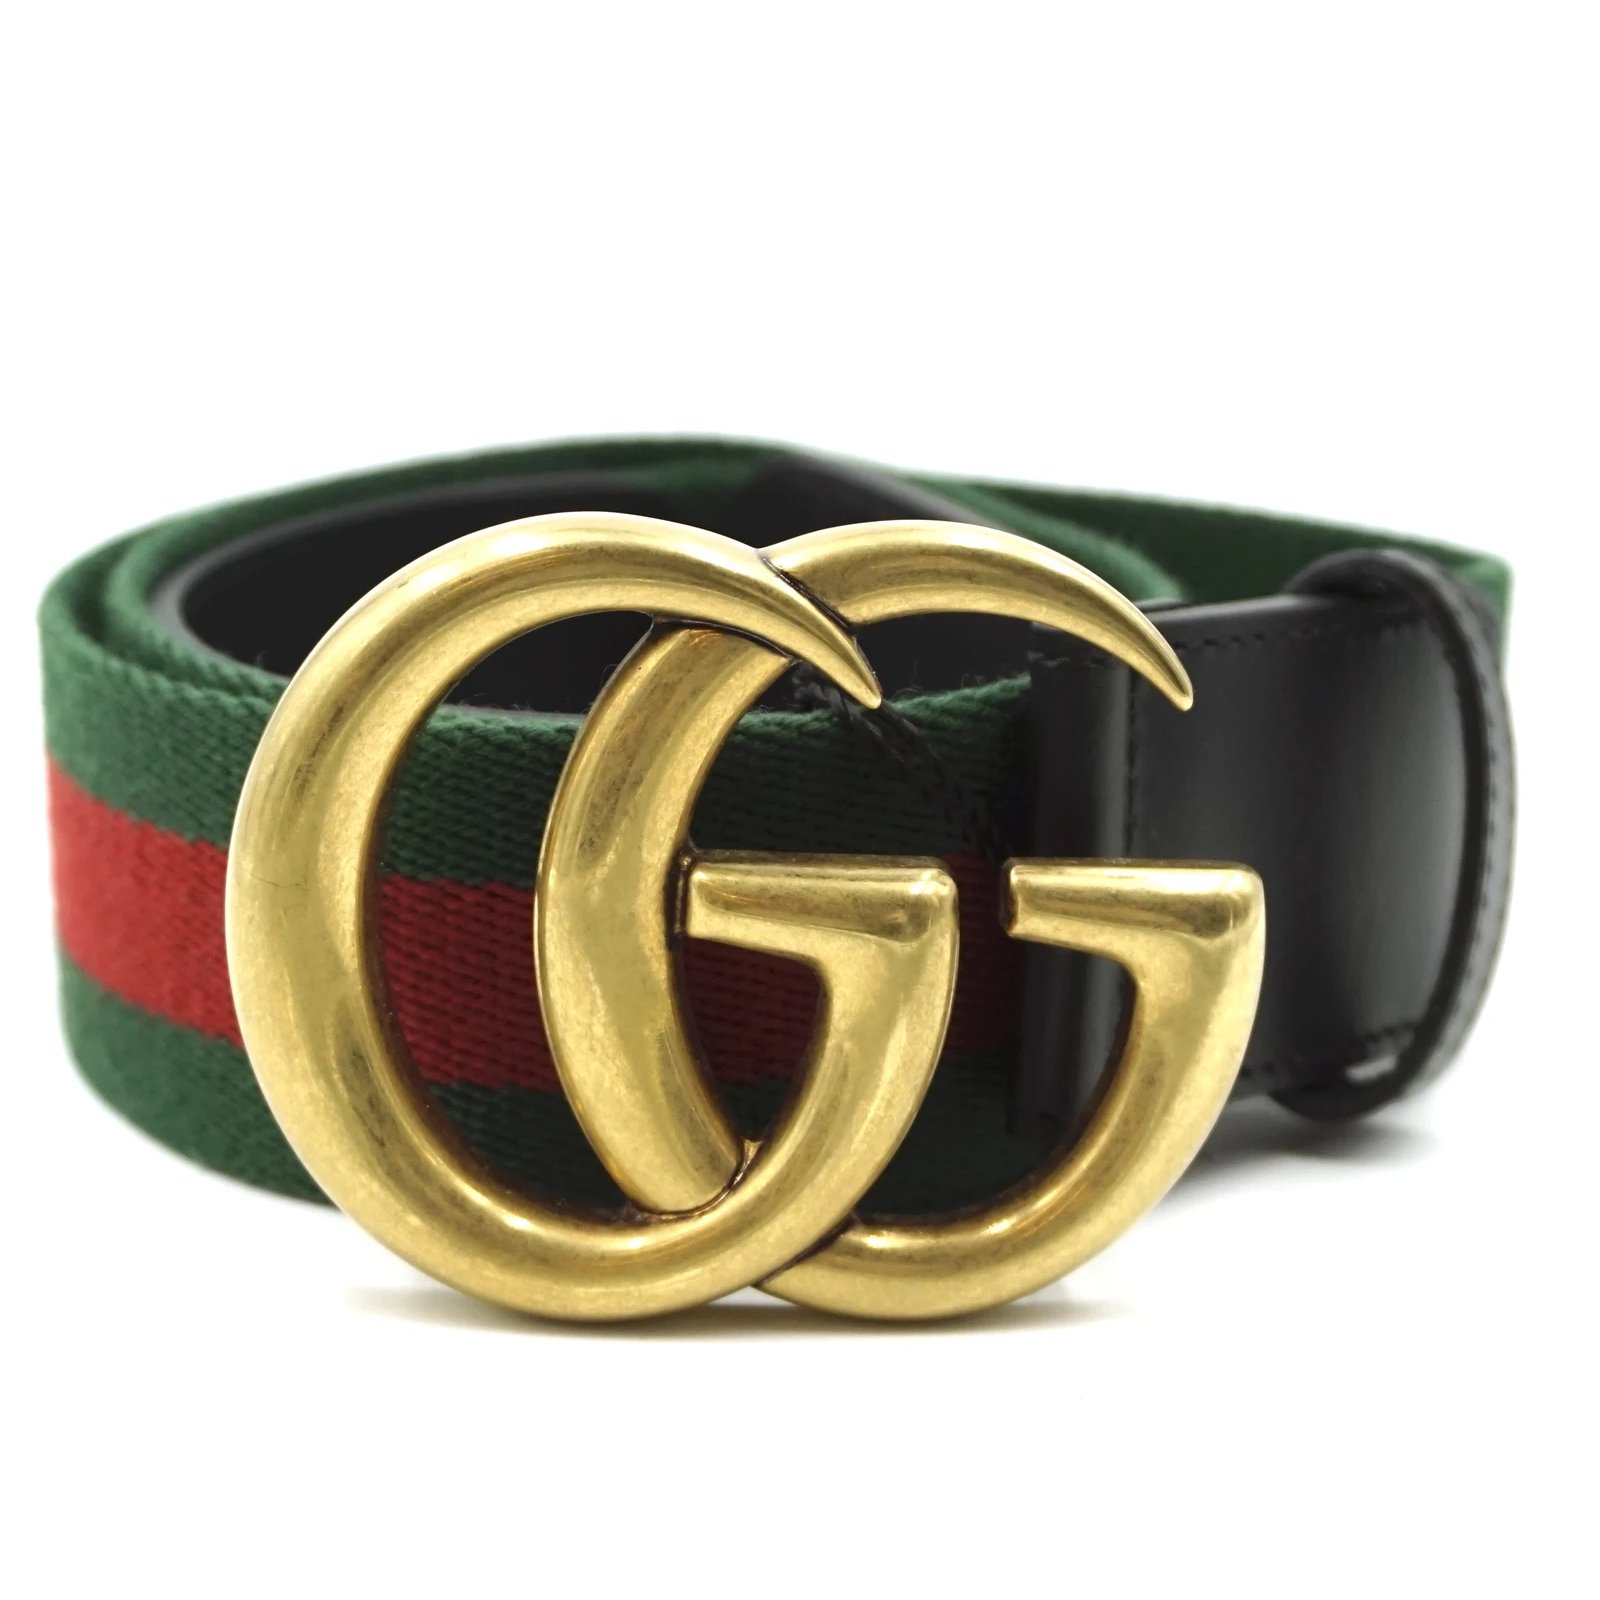 Gucci Gucci Green Red Marmont GG Stripe Belt Size 100/40 Belts Other ...